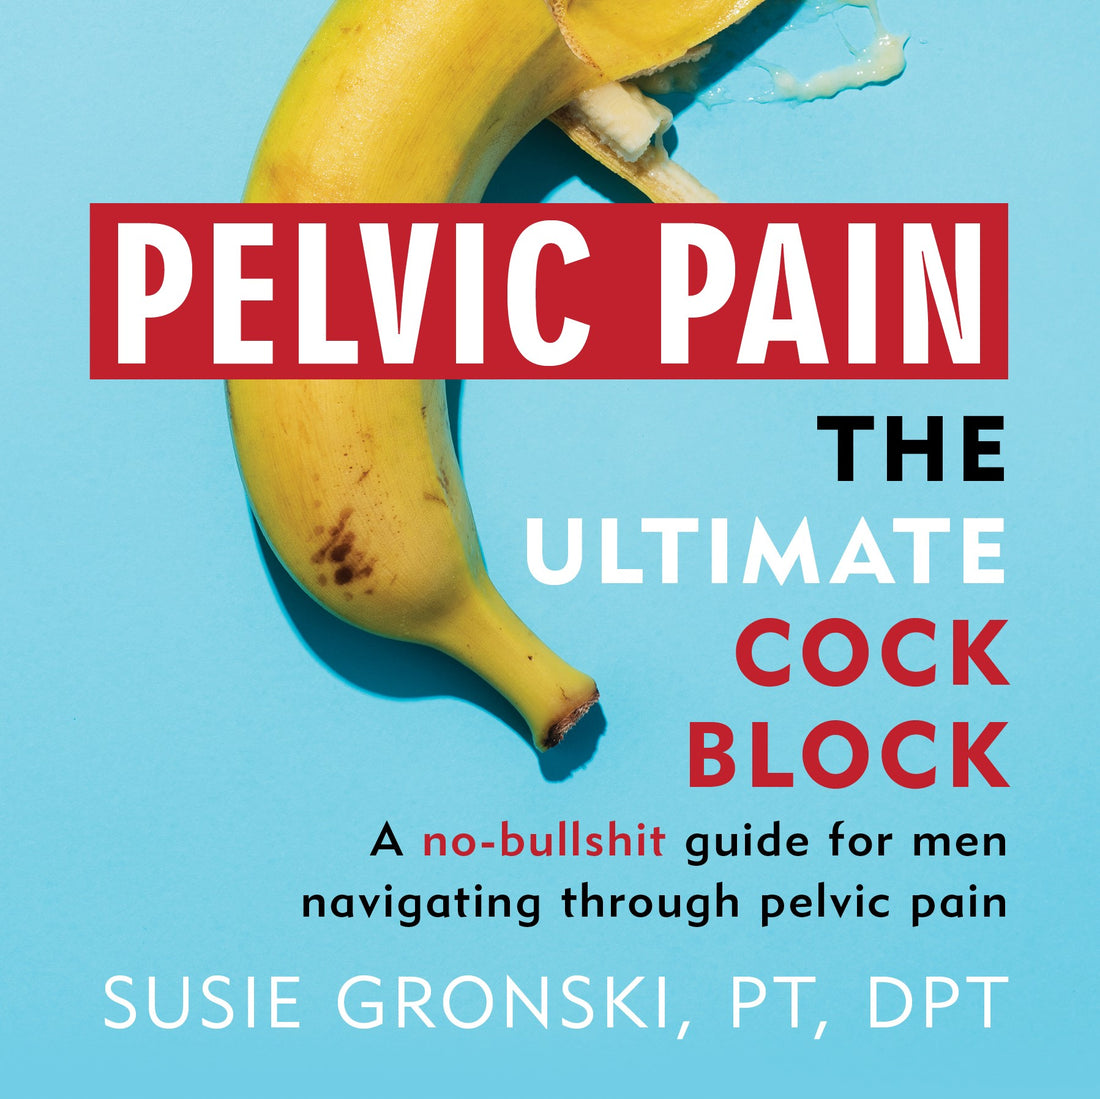 PELVIC PAIN THE ULTIMATE COCK BLOCK BY DR SUSIE GRONSKI